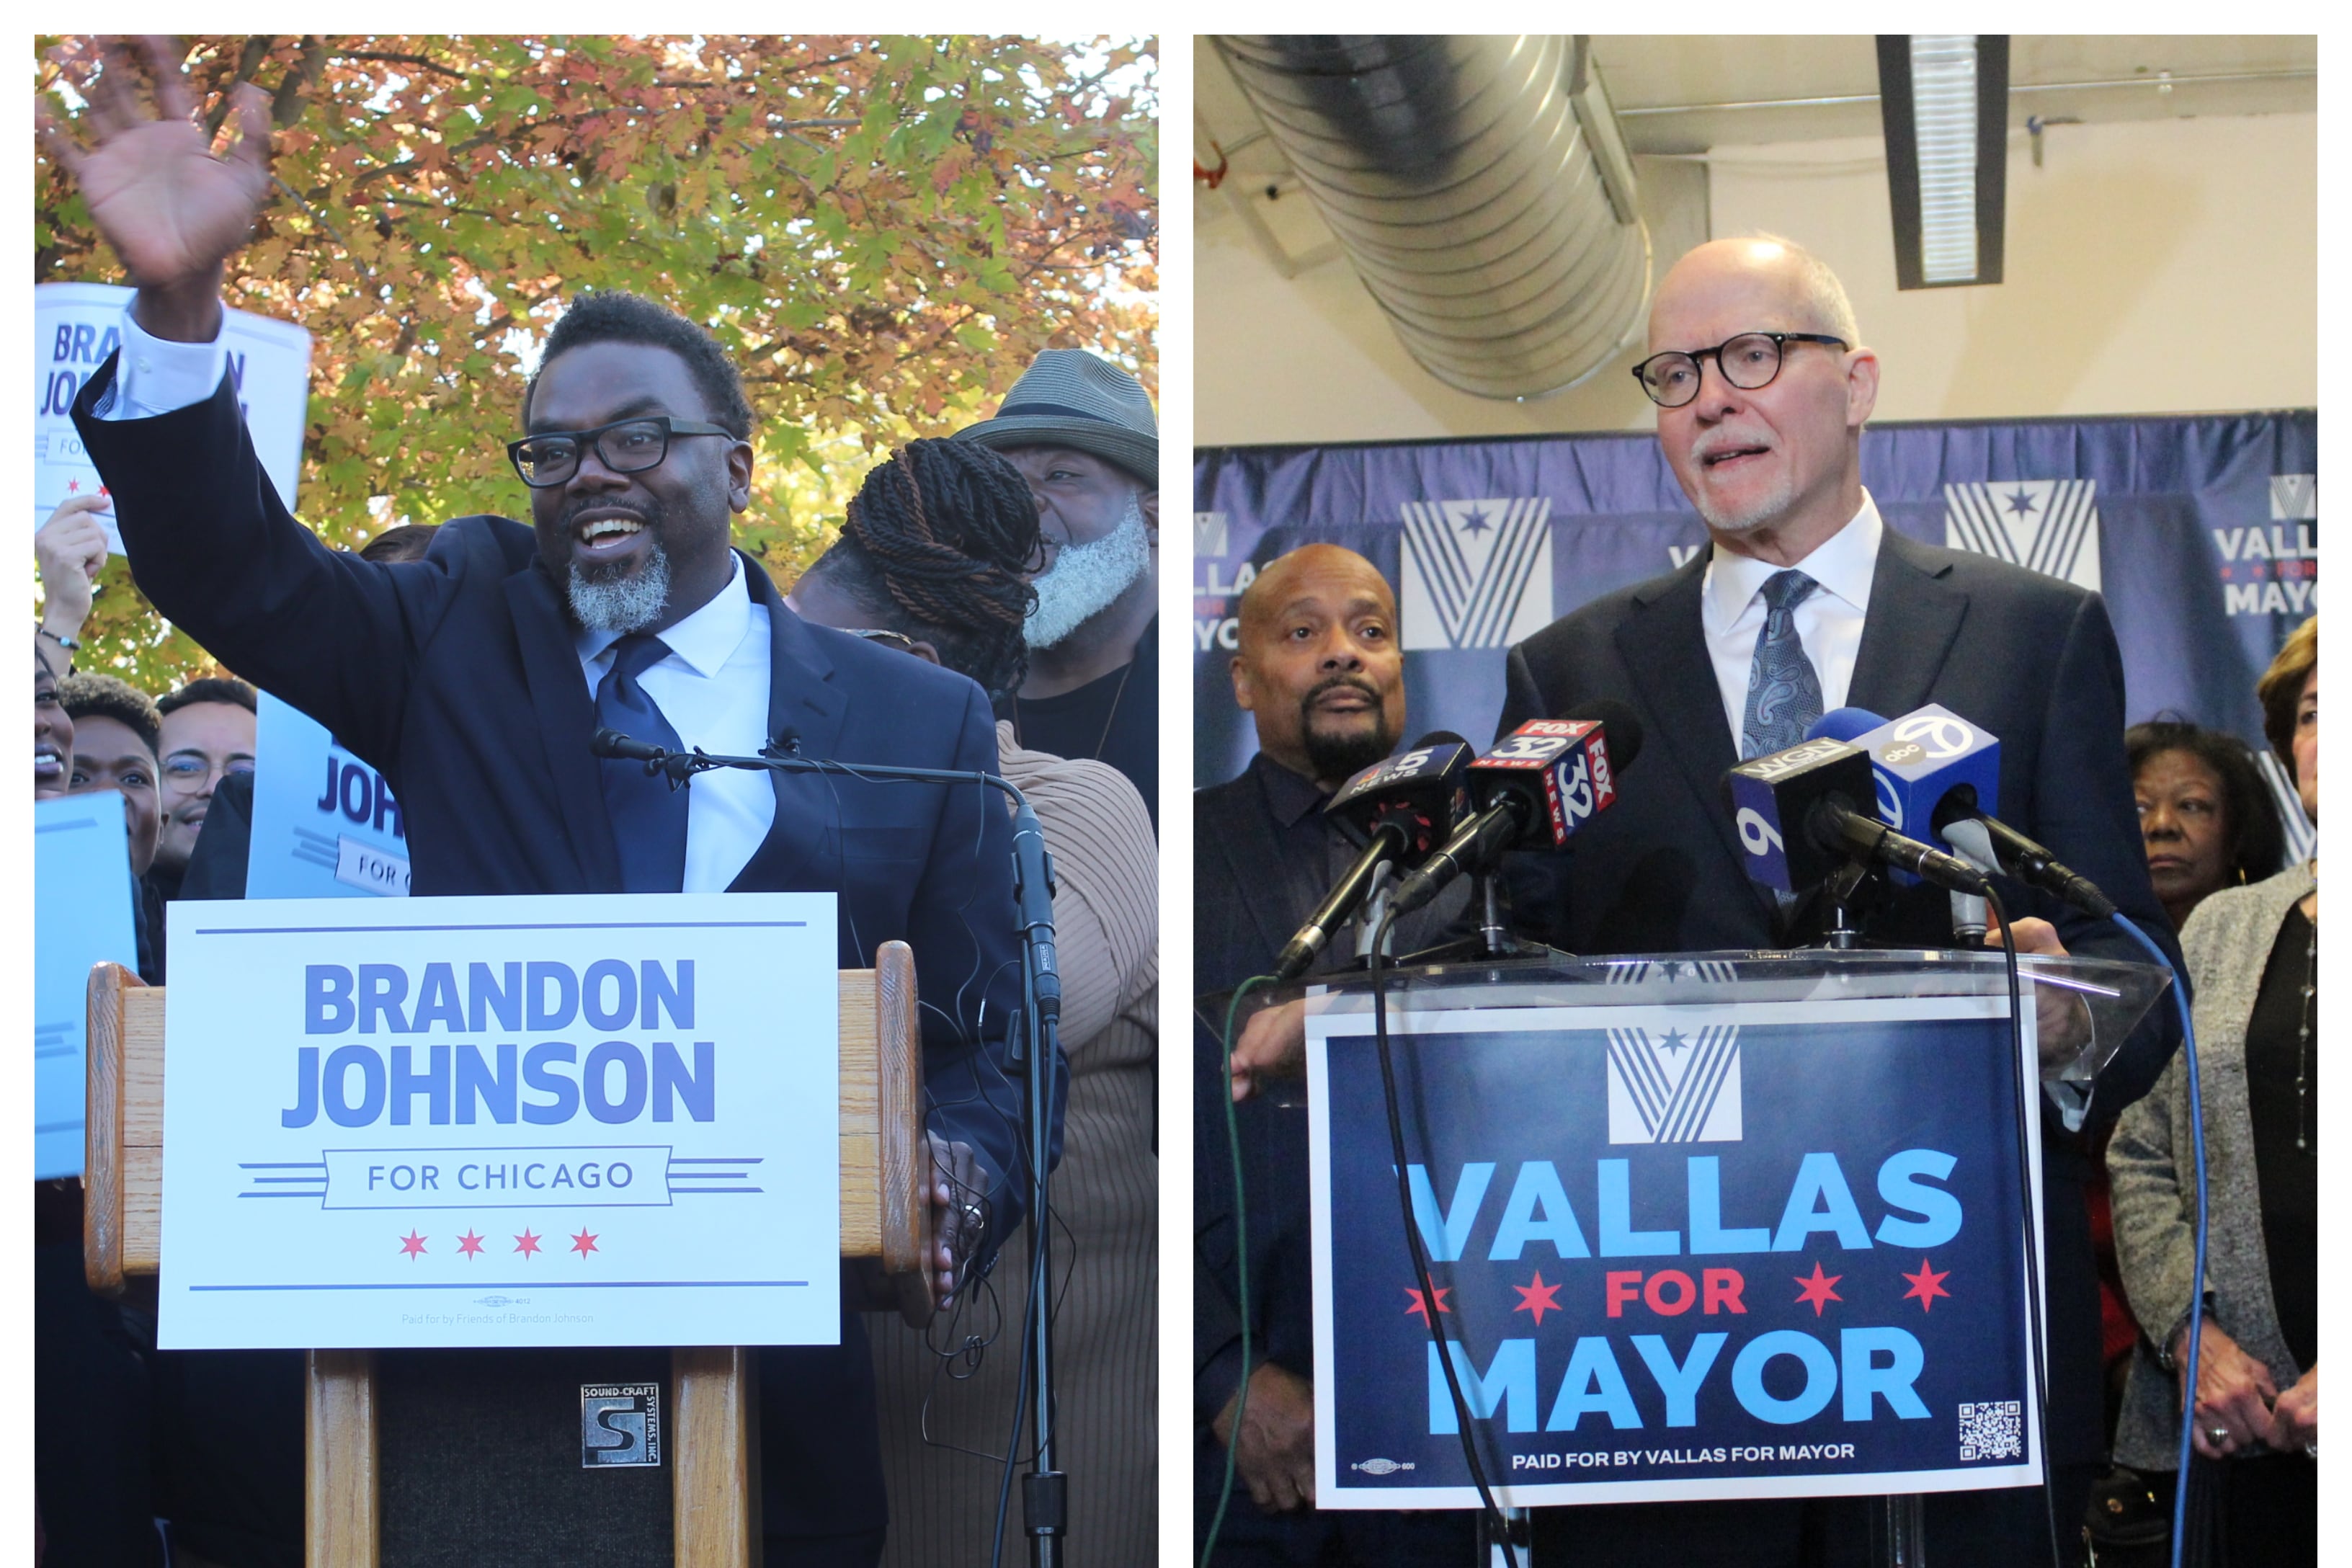 A collage of two men running for mayor of Chicago standing at podiums flanked by supporters.